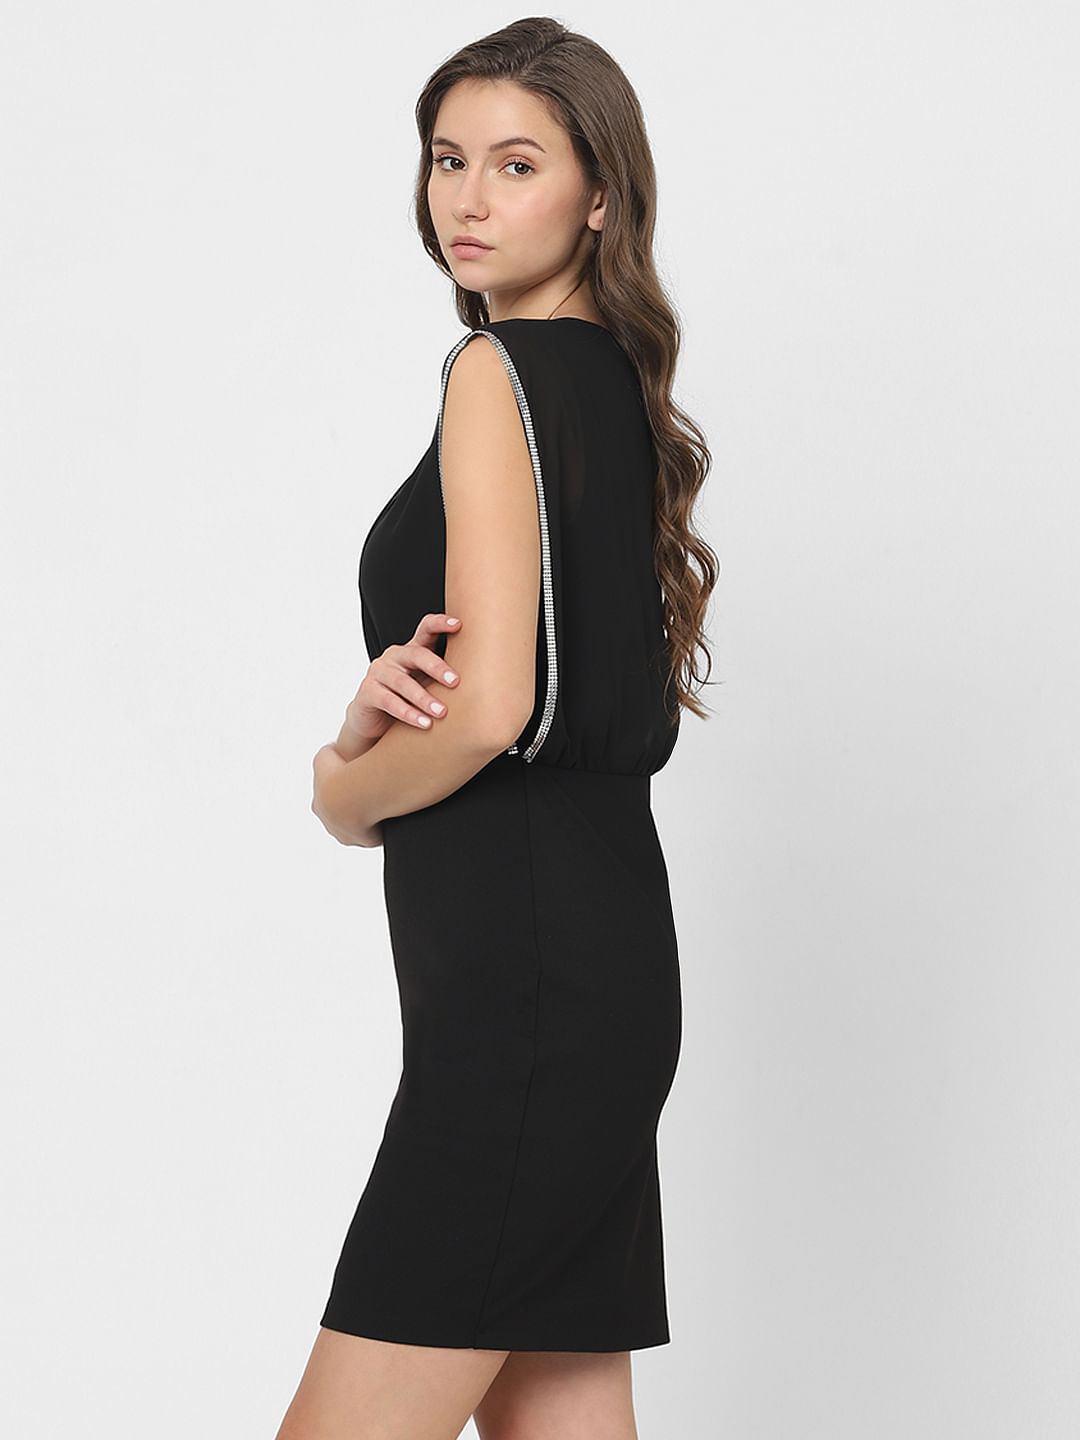 A black dress that cost $40 - the Plath view 2